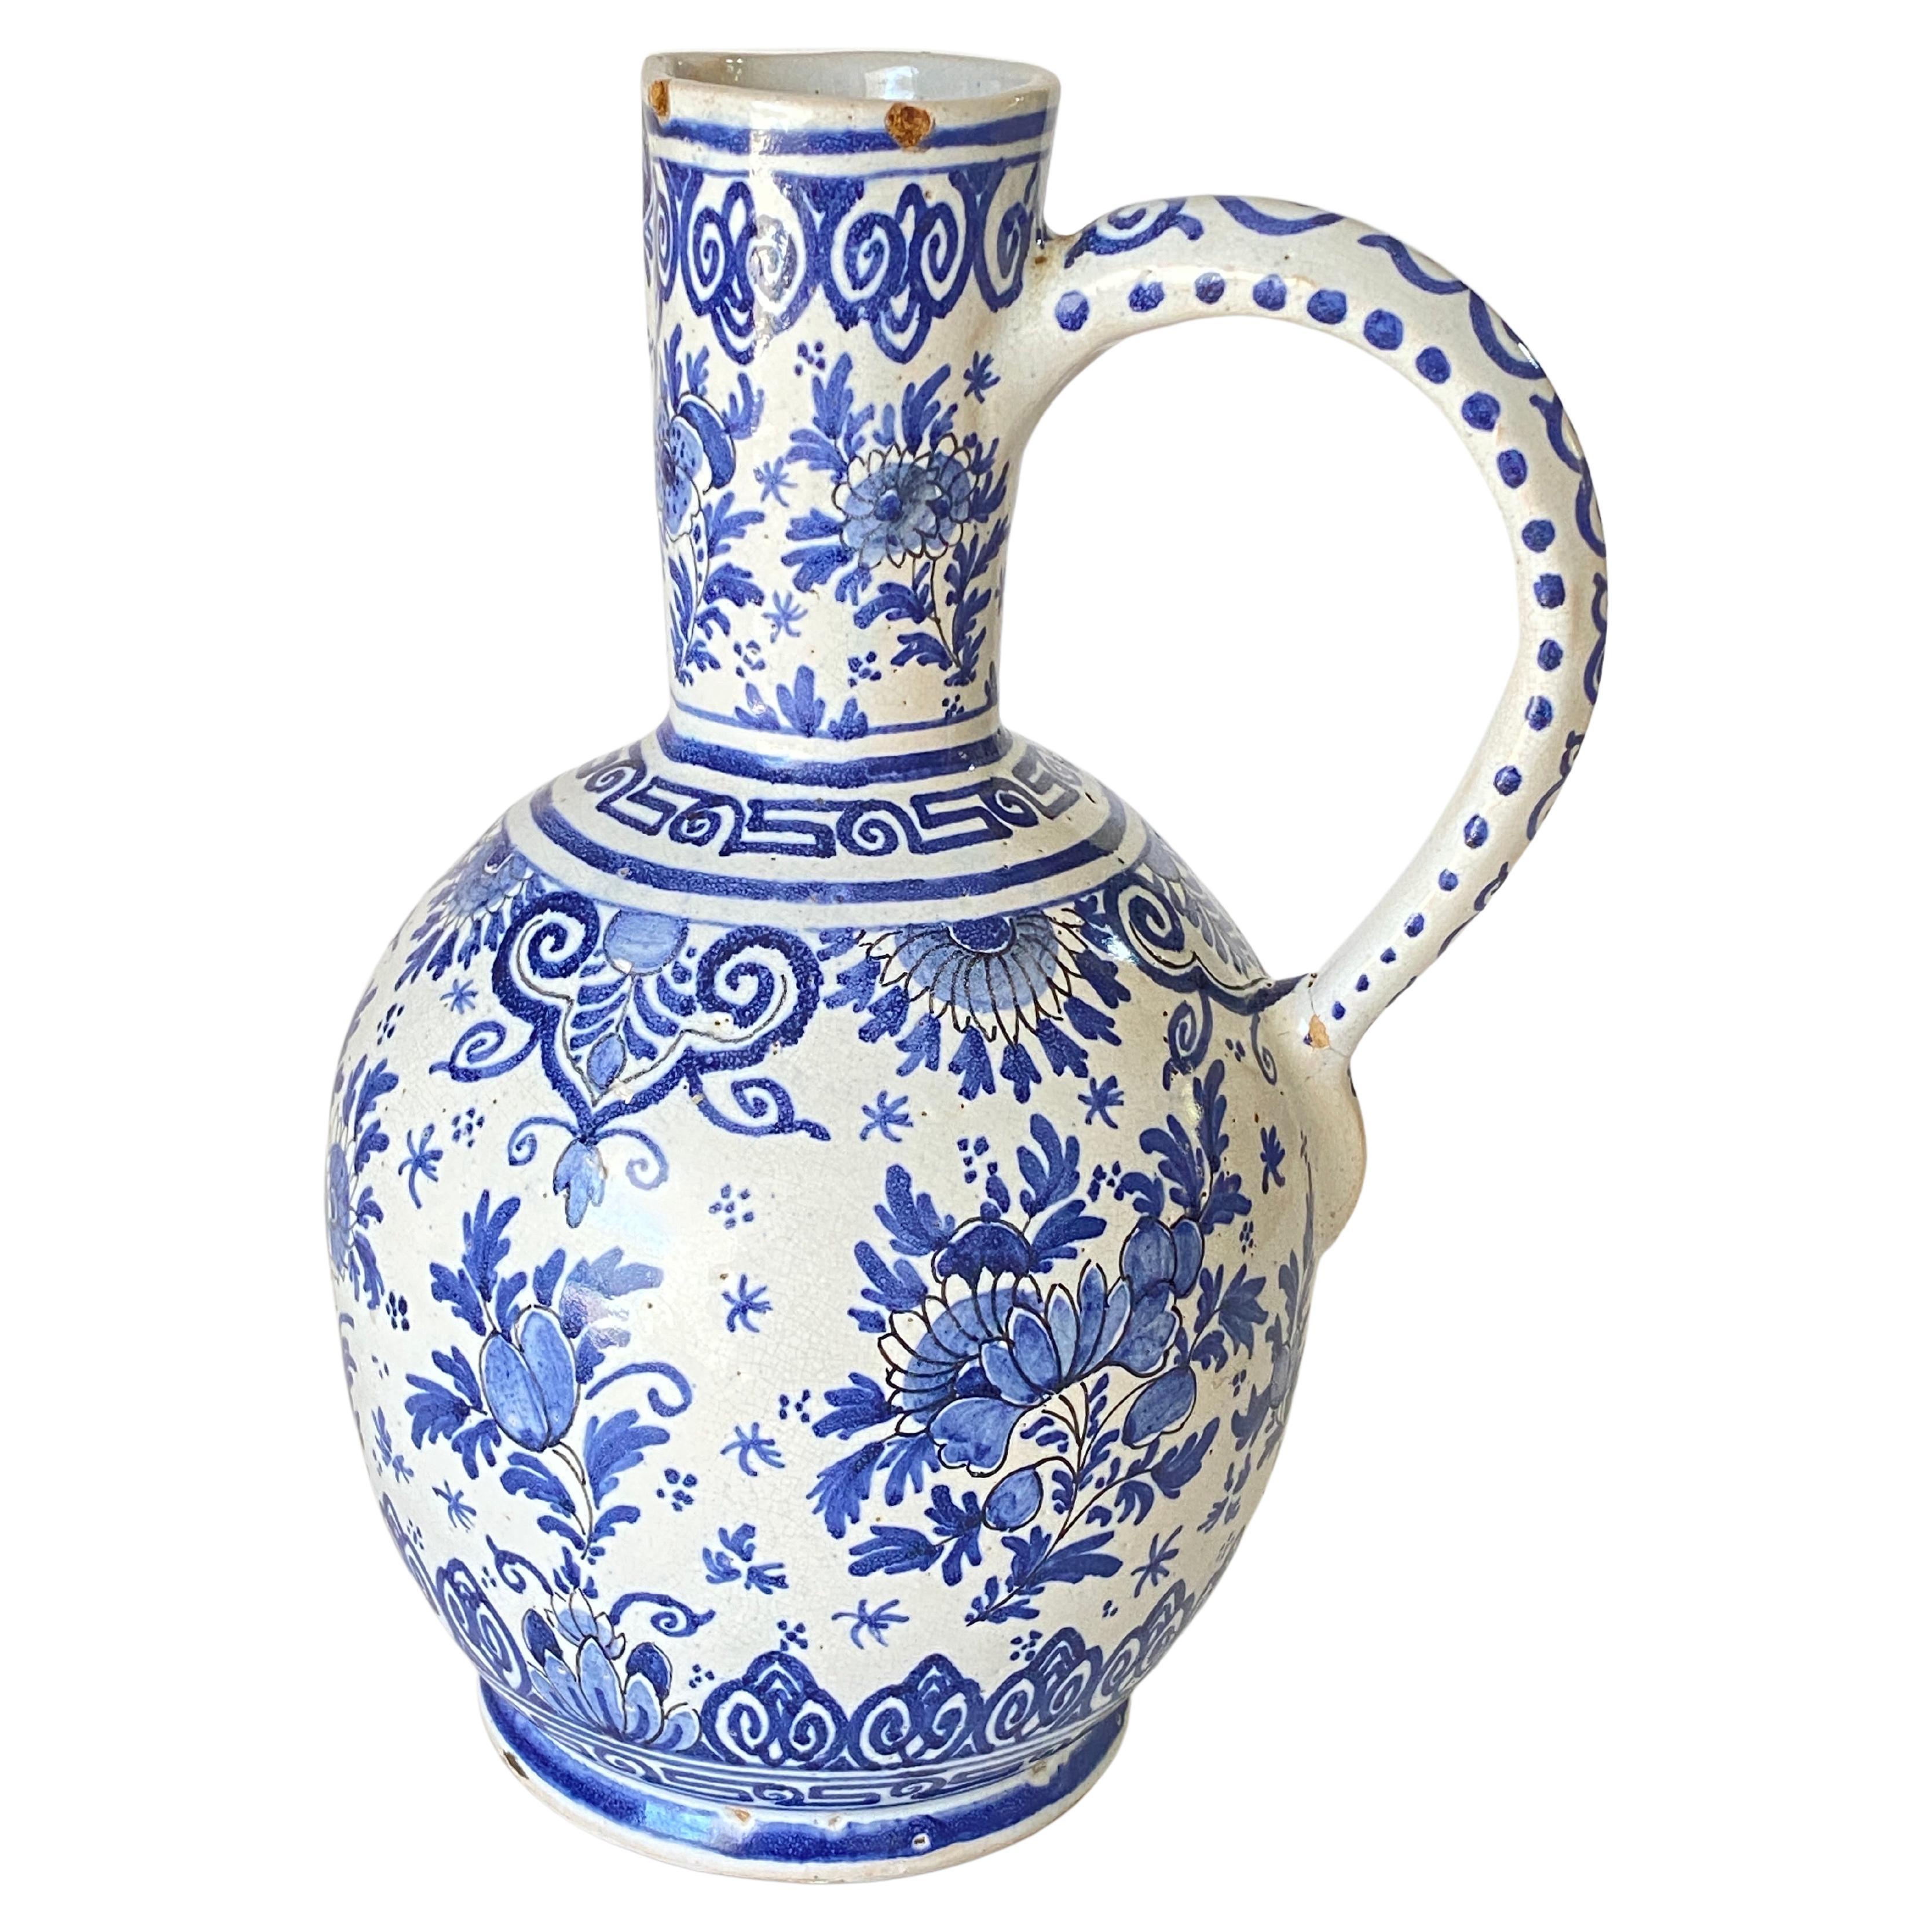 Delft Jug in Faïence, White and Blue, 18eme Century by Adrian Pynacker Signed For Sale